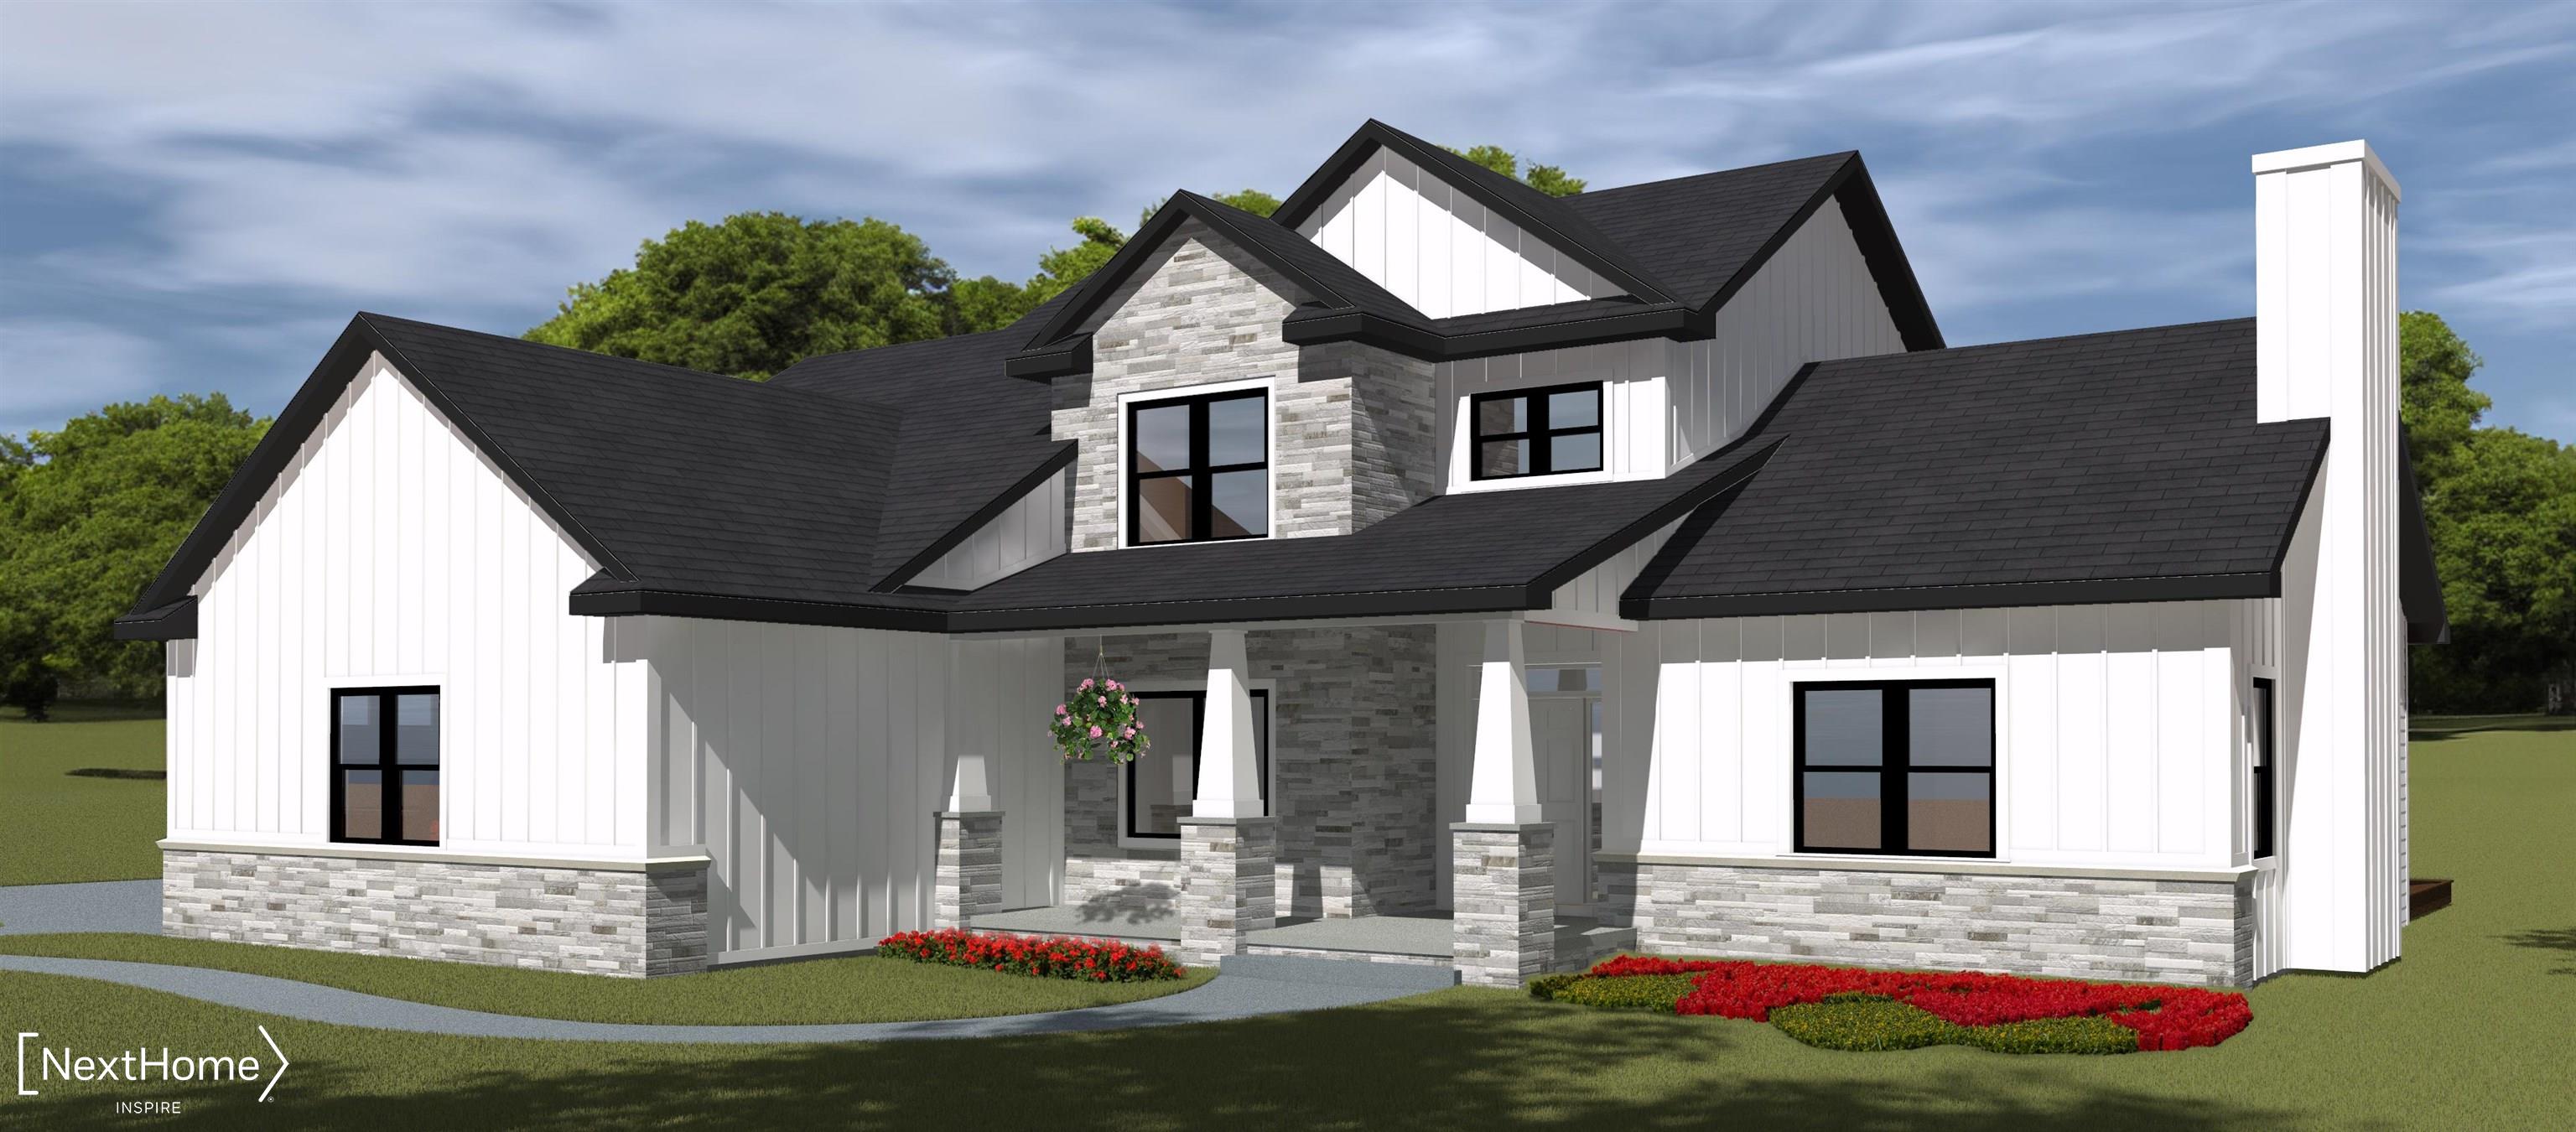 12695 Meadow View Circle, Lot 45, Holly, MI 48442